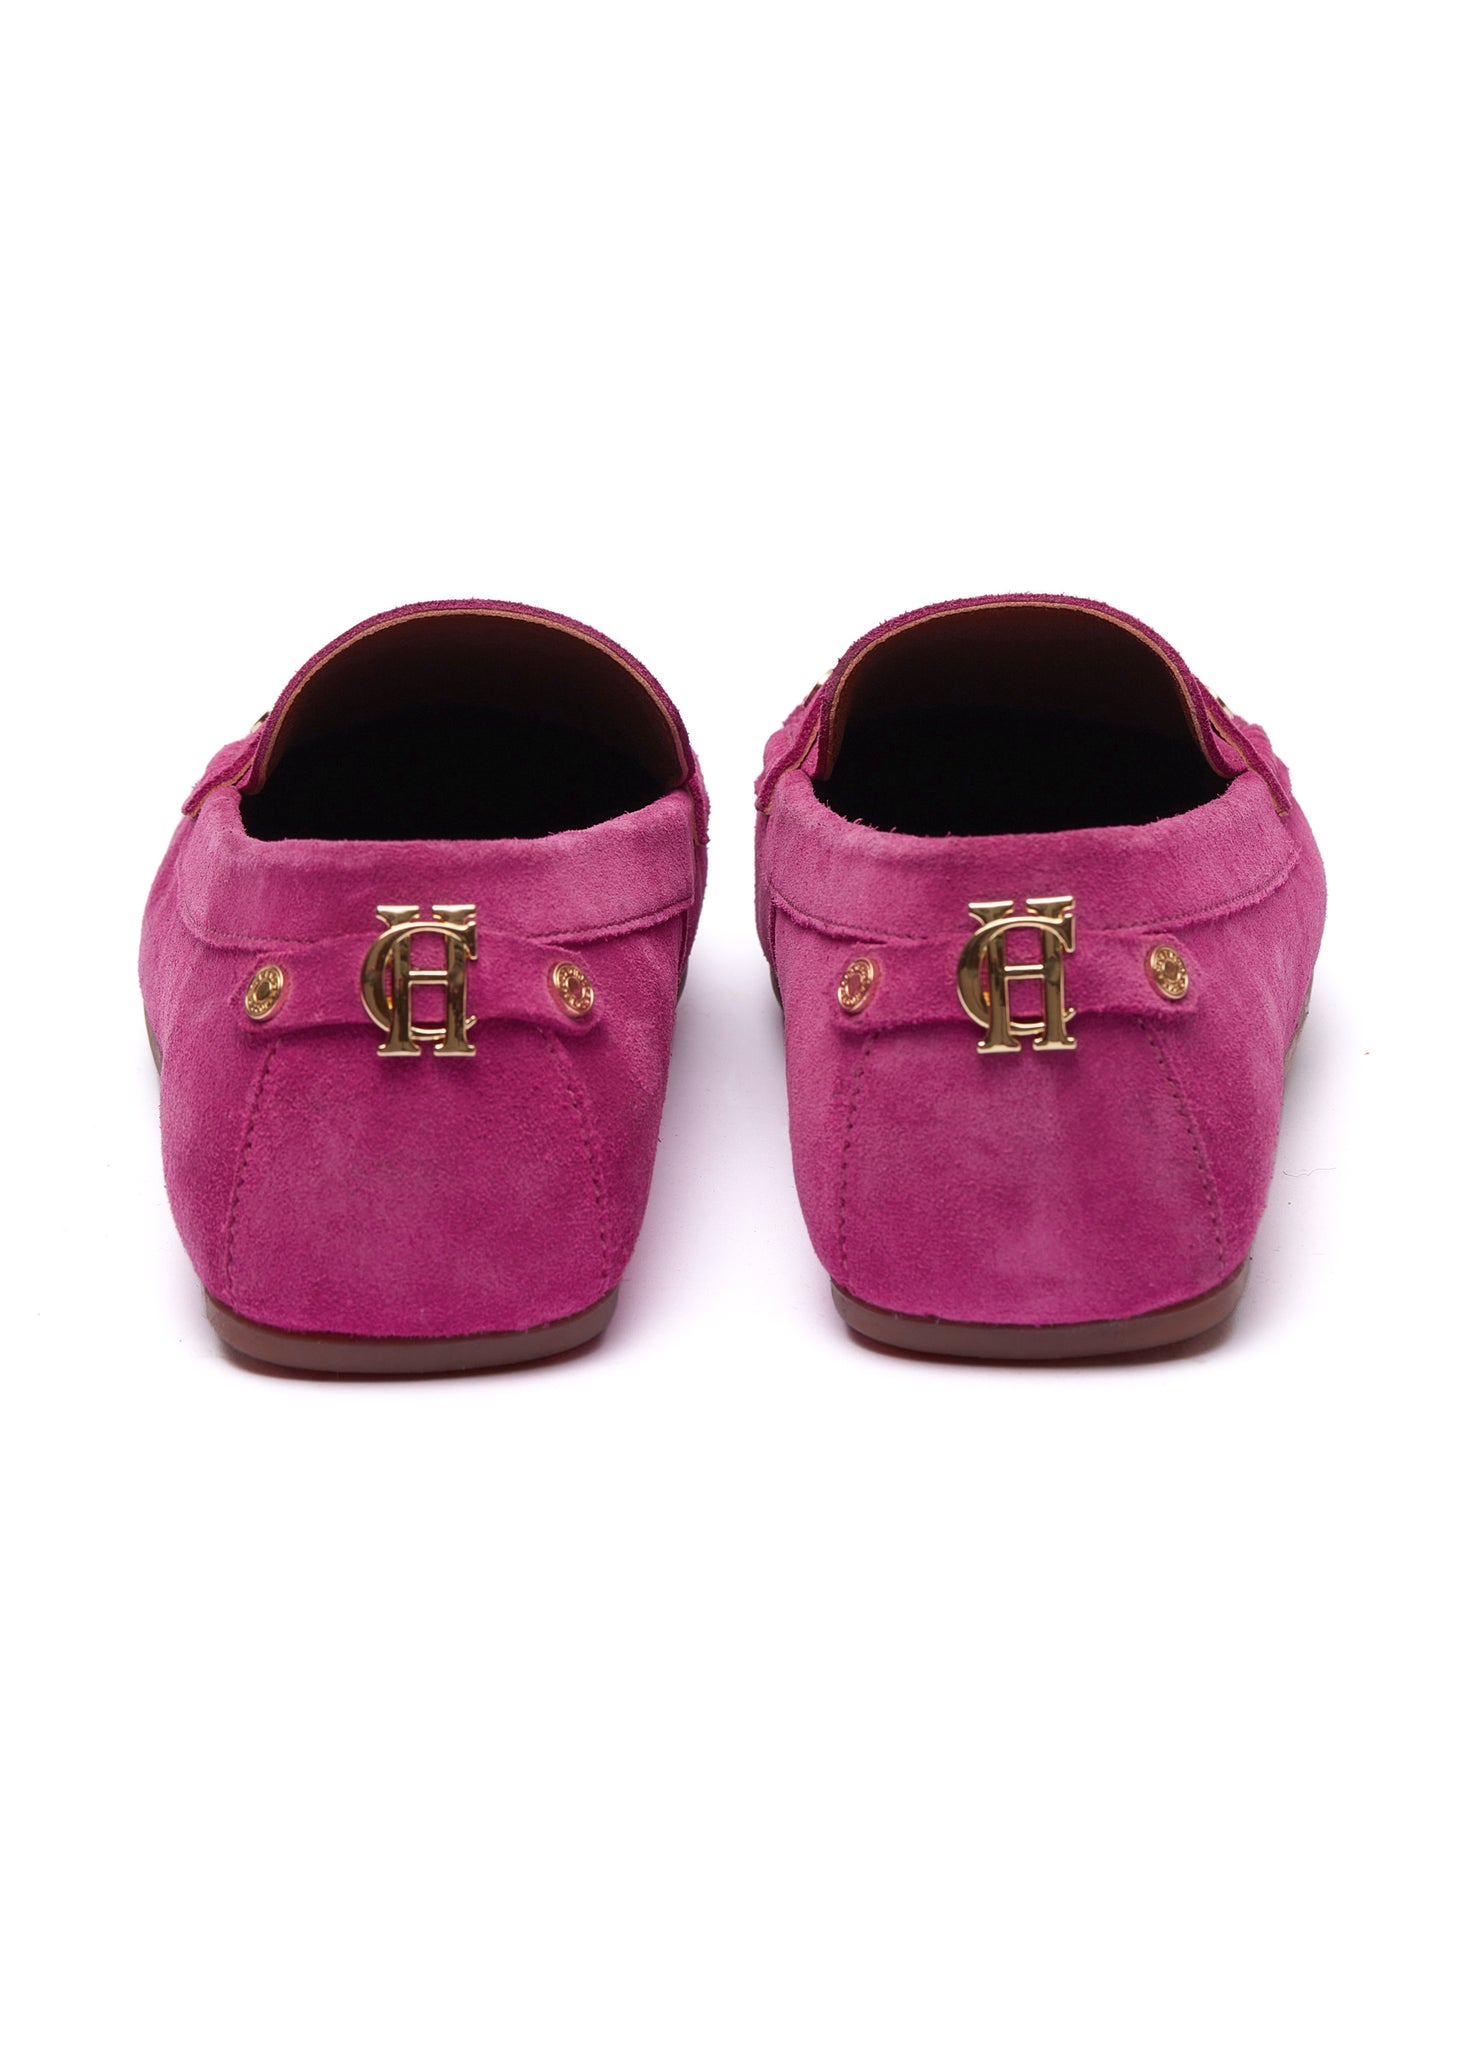 Back of bright pink suede loafers with a leather sole and gold hardware